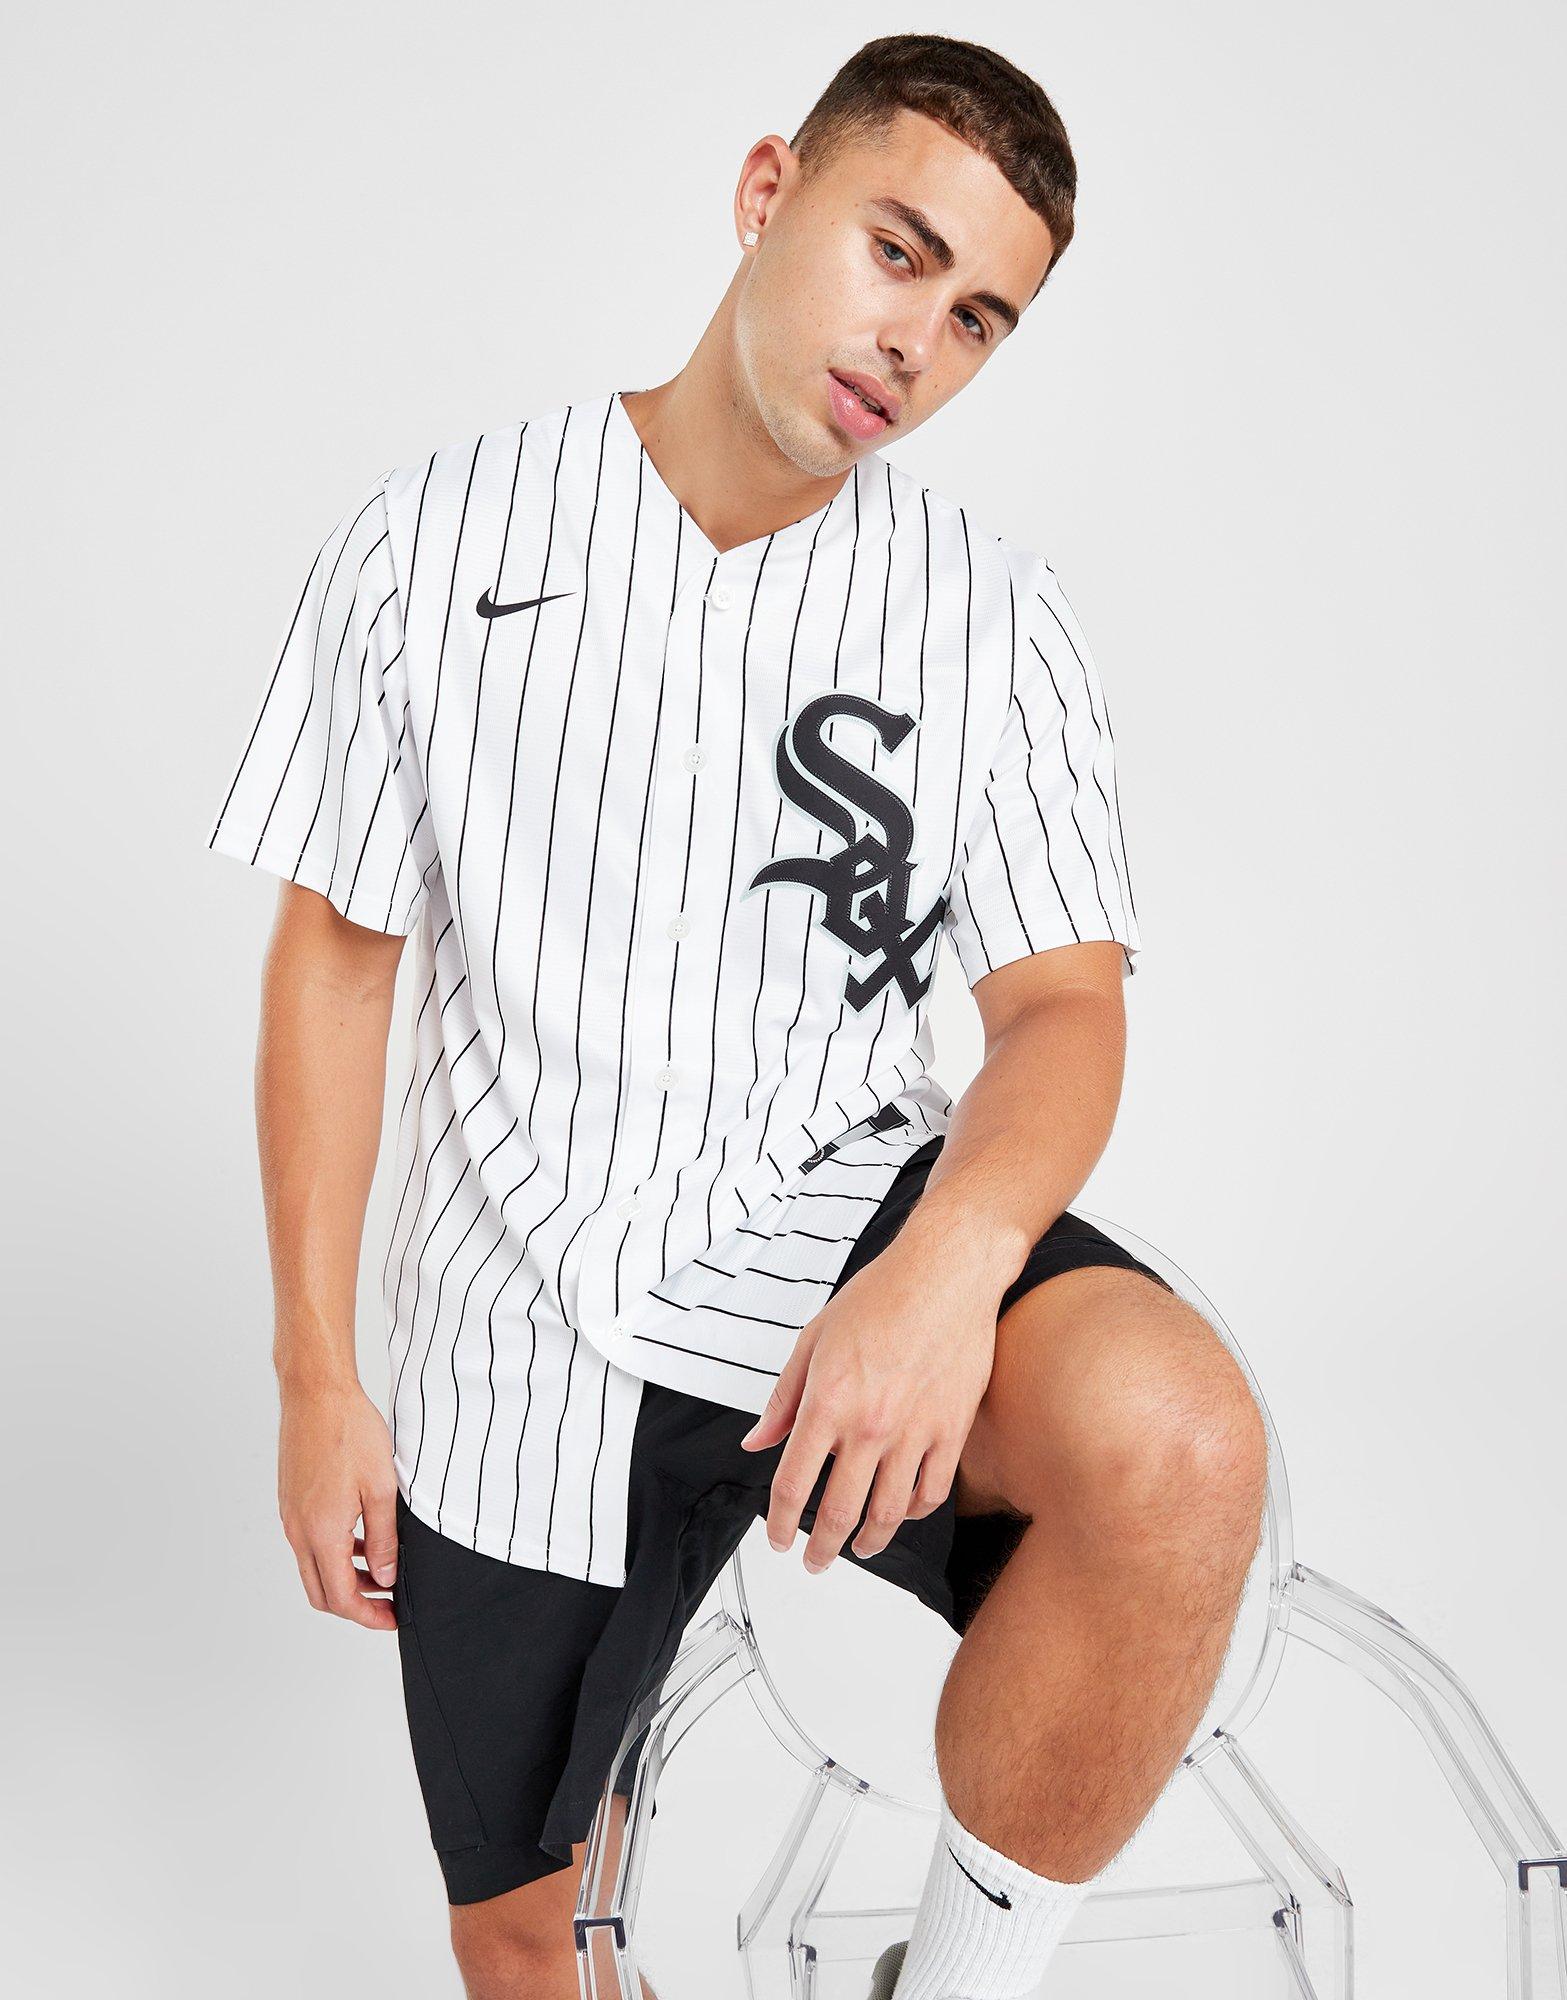 Other, Nwt Jordan Chicago White Sox Southside Baseball Jersey Size Ml